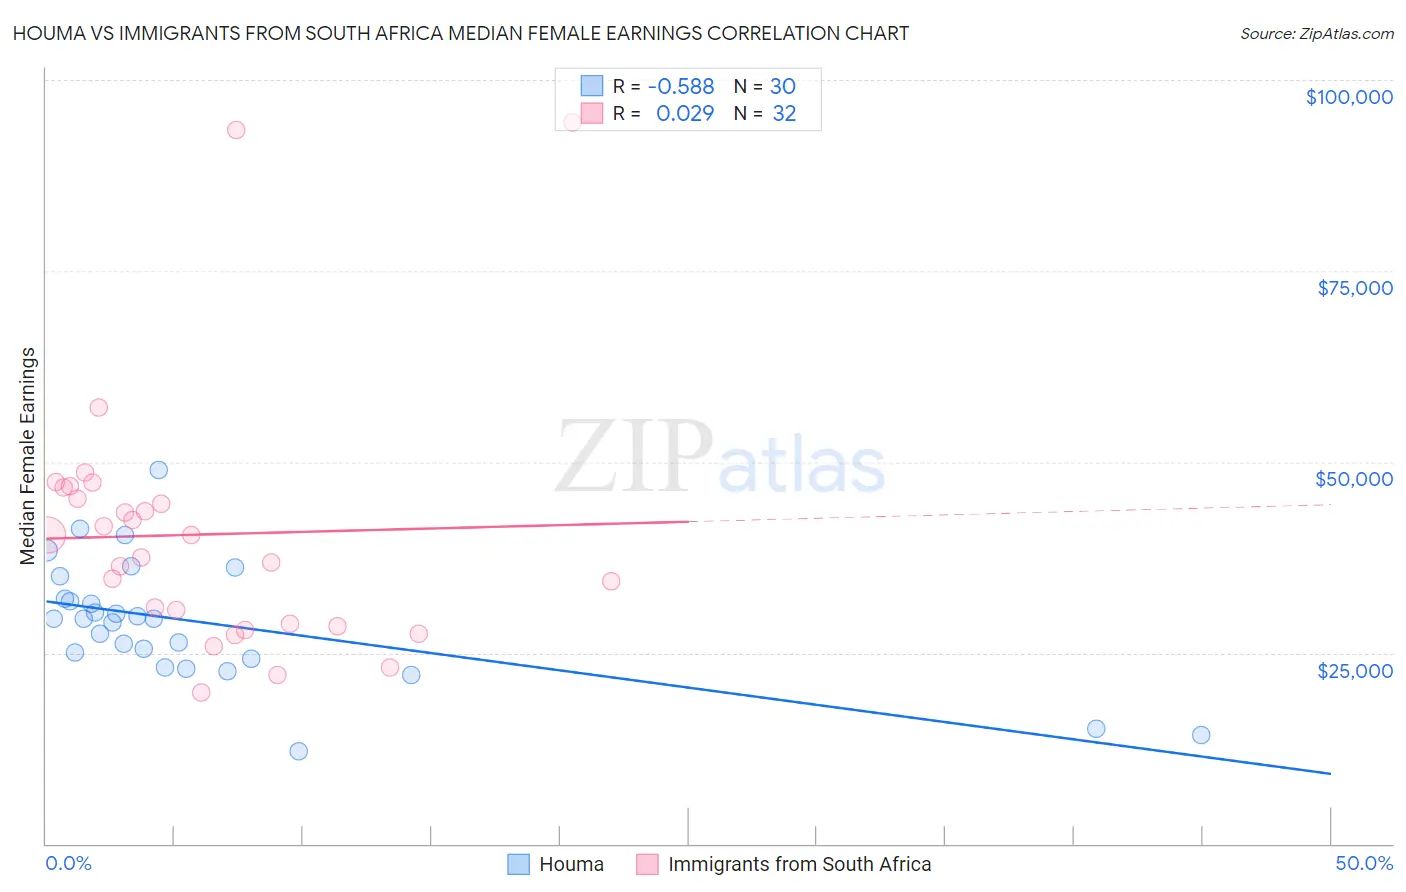 Houma vs Immigrants from South Africa Median Female Earnings